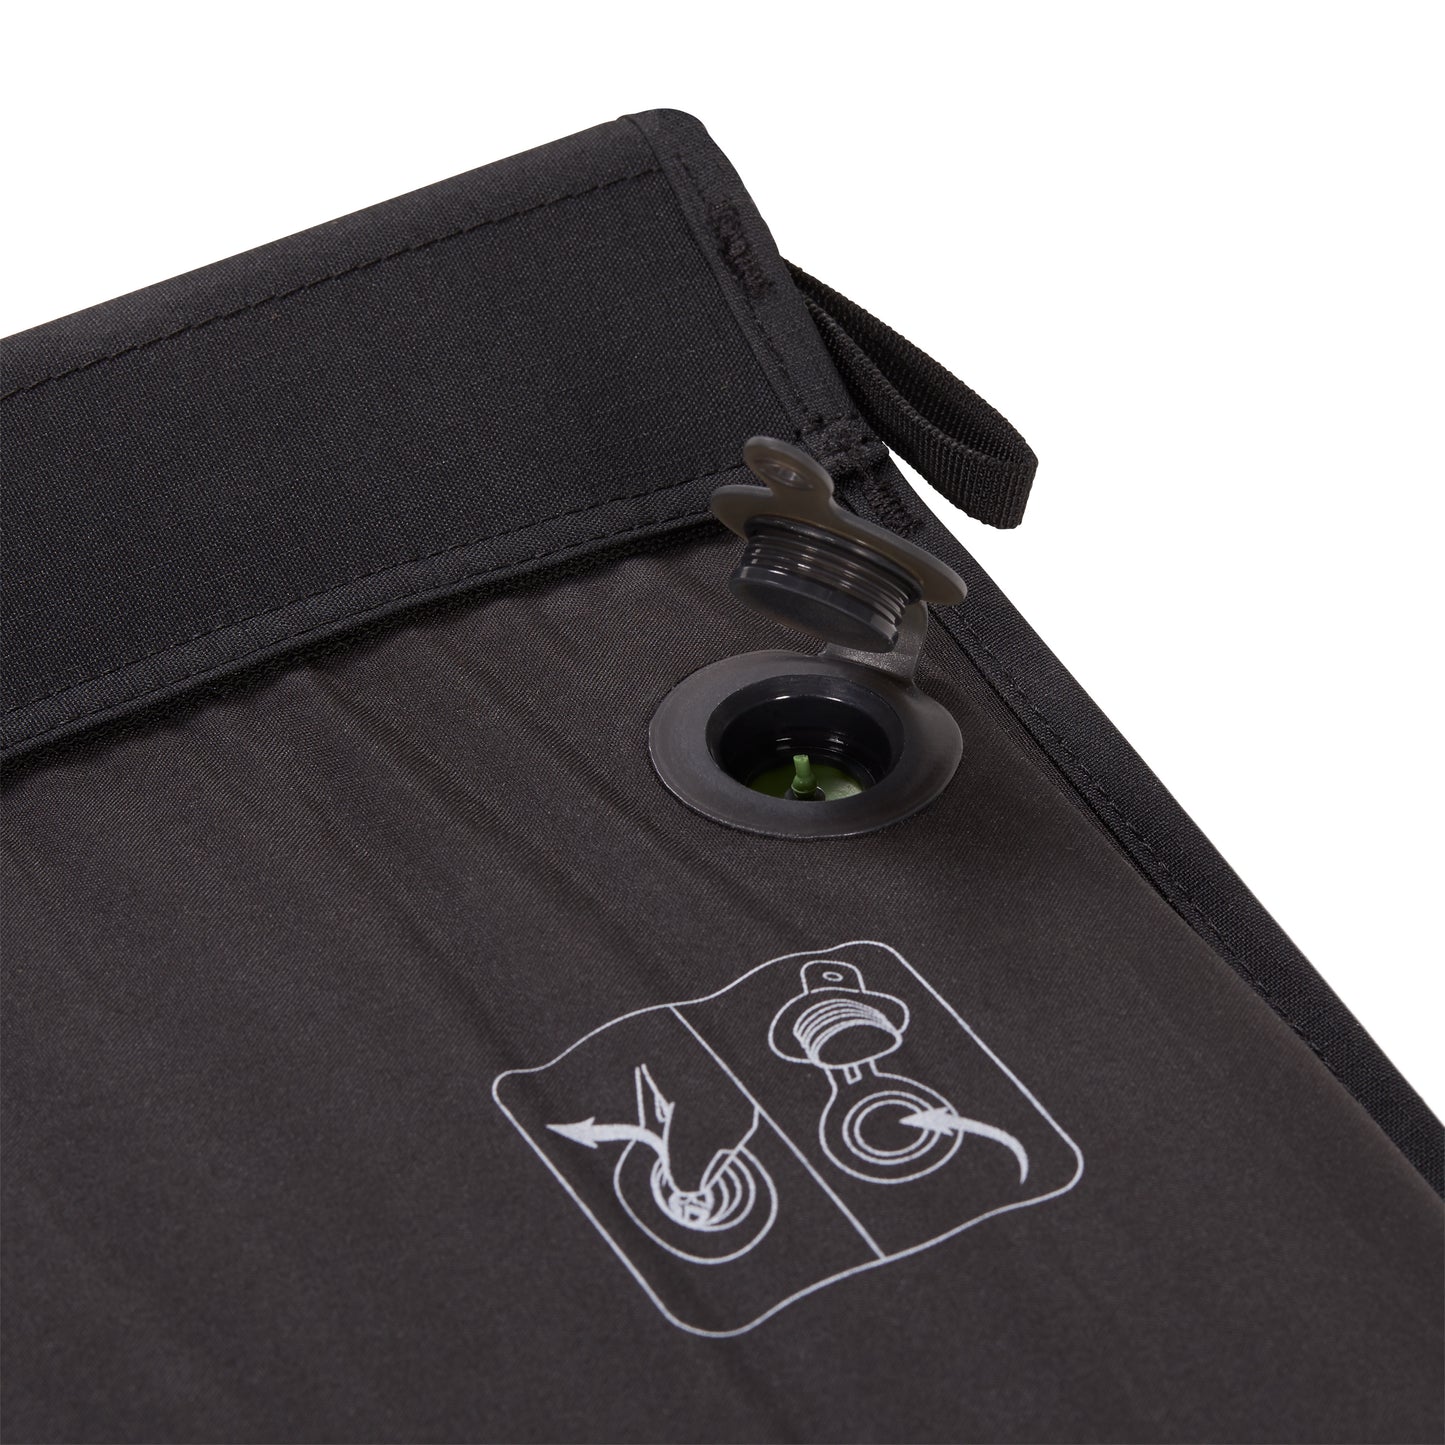 Insulated Cot One Pad (No Frame) - Black